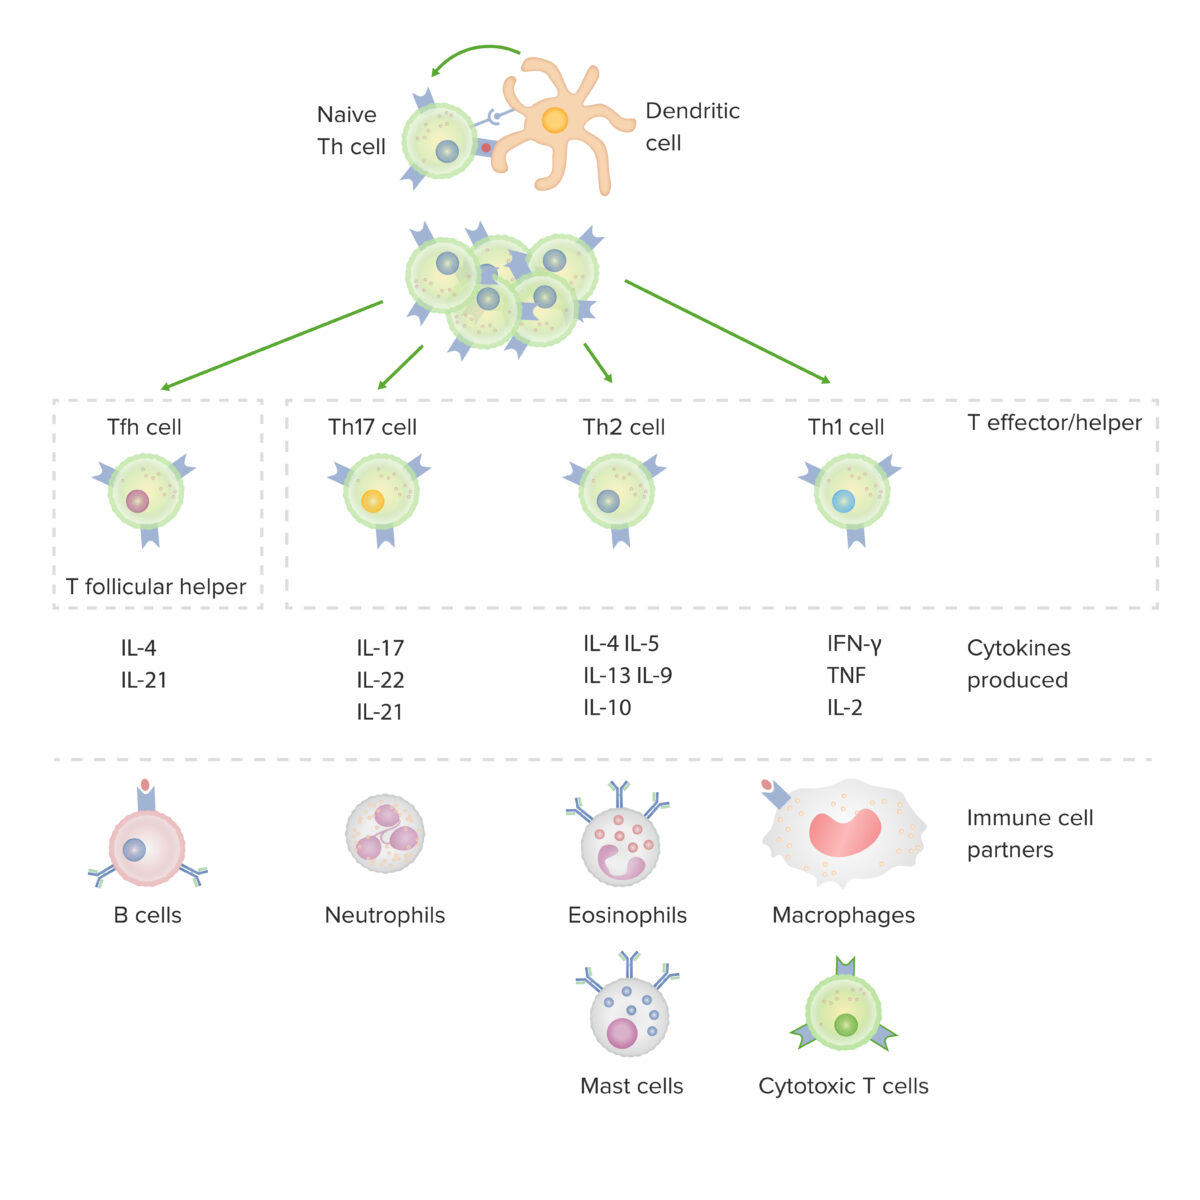 Subsets of cd4-+ helper t cells